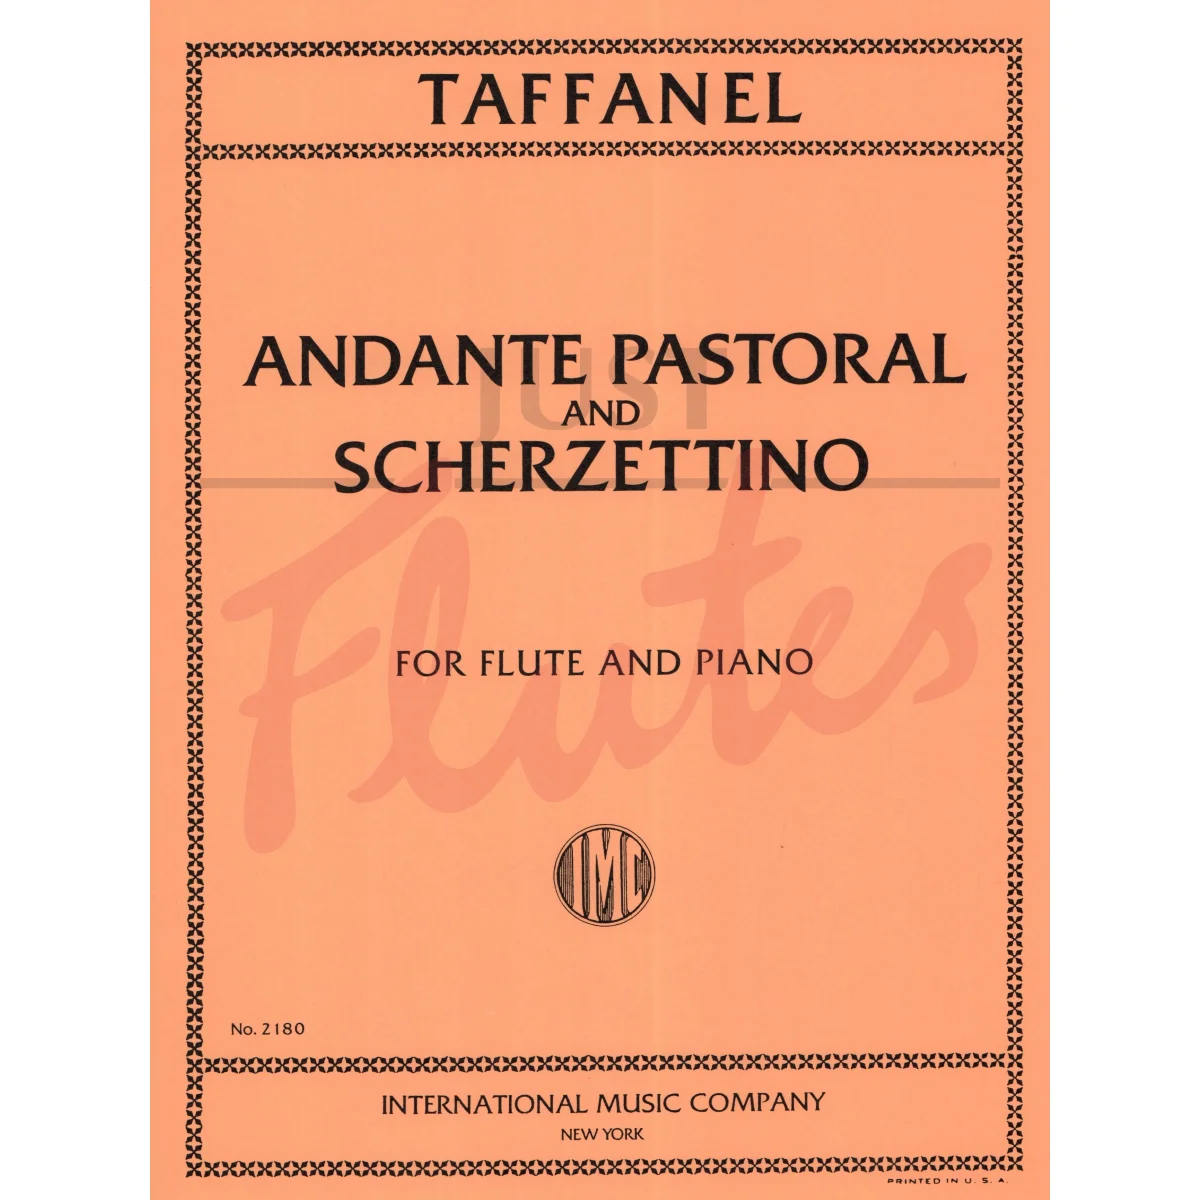 Andante Pastoral and Scherzettino for Flute and Piano